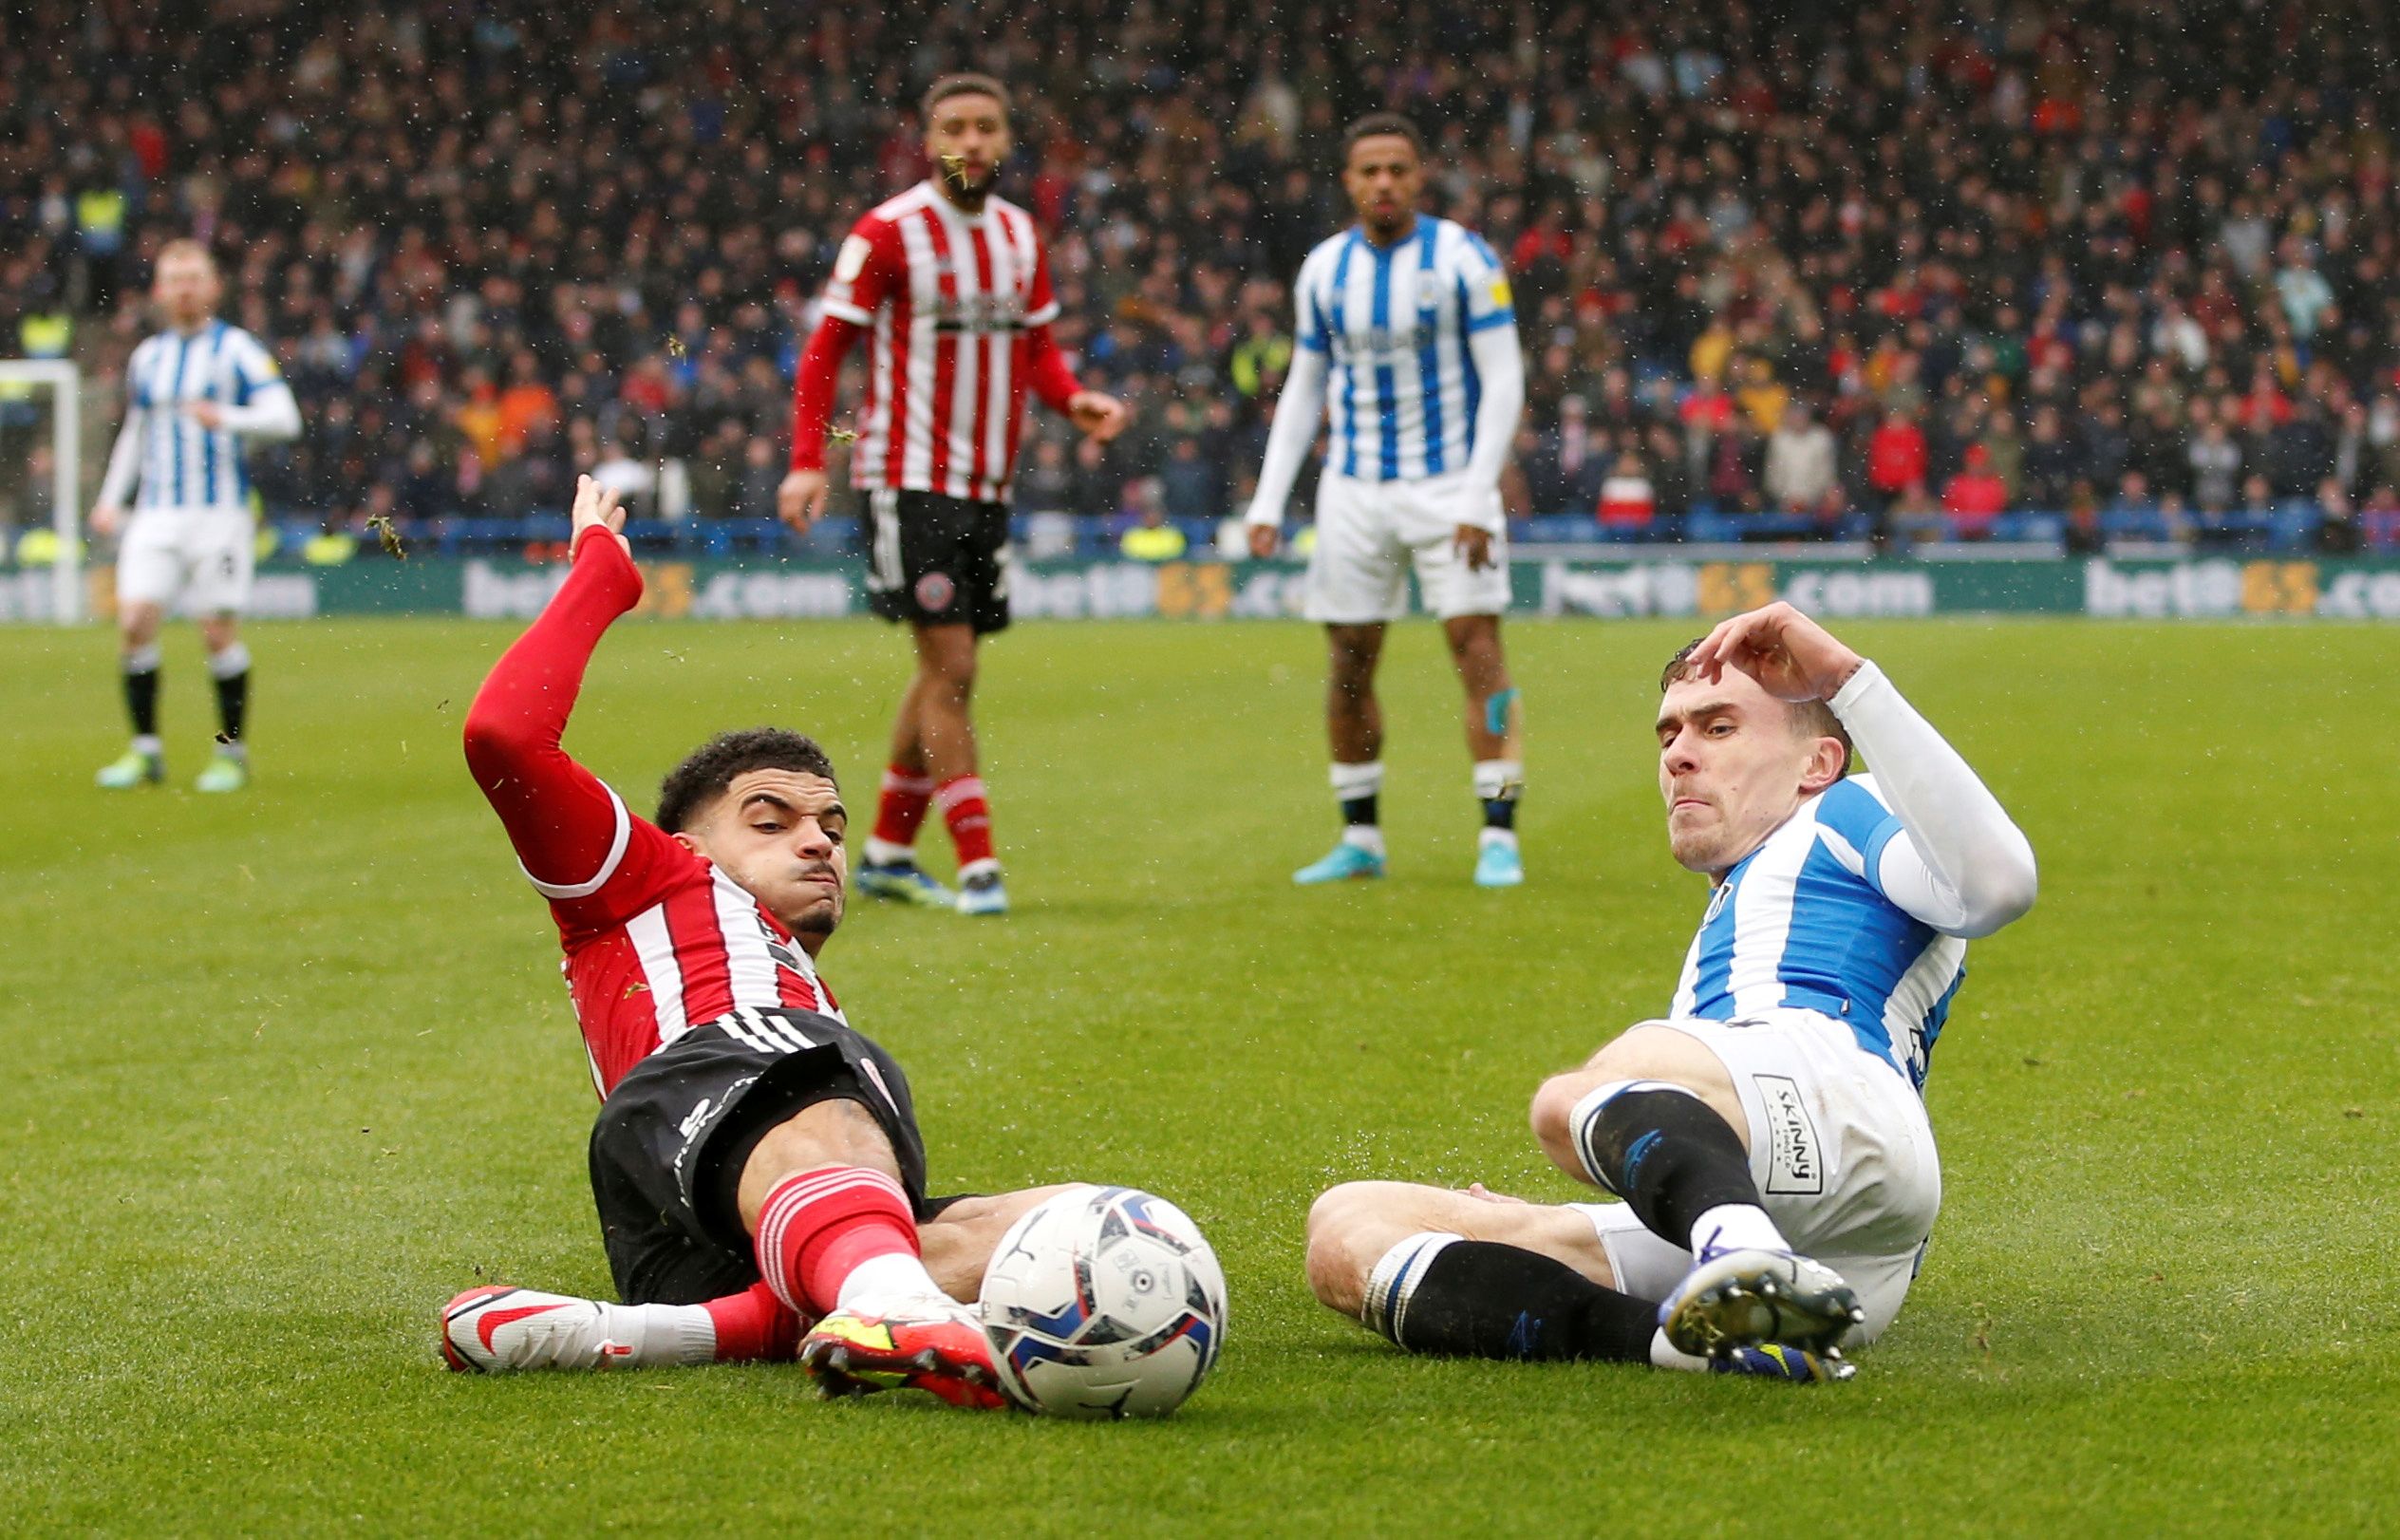 Soccer Football - Championship - Huddersfield Town v Sheffield United - John Smith's Stadium, Huddersfield, Britain - February 12, 2022 Sheffield United's Morgan Gibbs-White in action with Huddersfield Town's Josh Ruffels  Action Images/Ed Sykes  EDITORIAL USE ONLY. No use with unauthorized audio, video, data, fixture lists, club/league logos or 